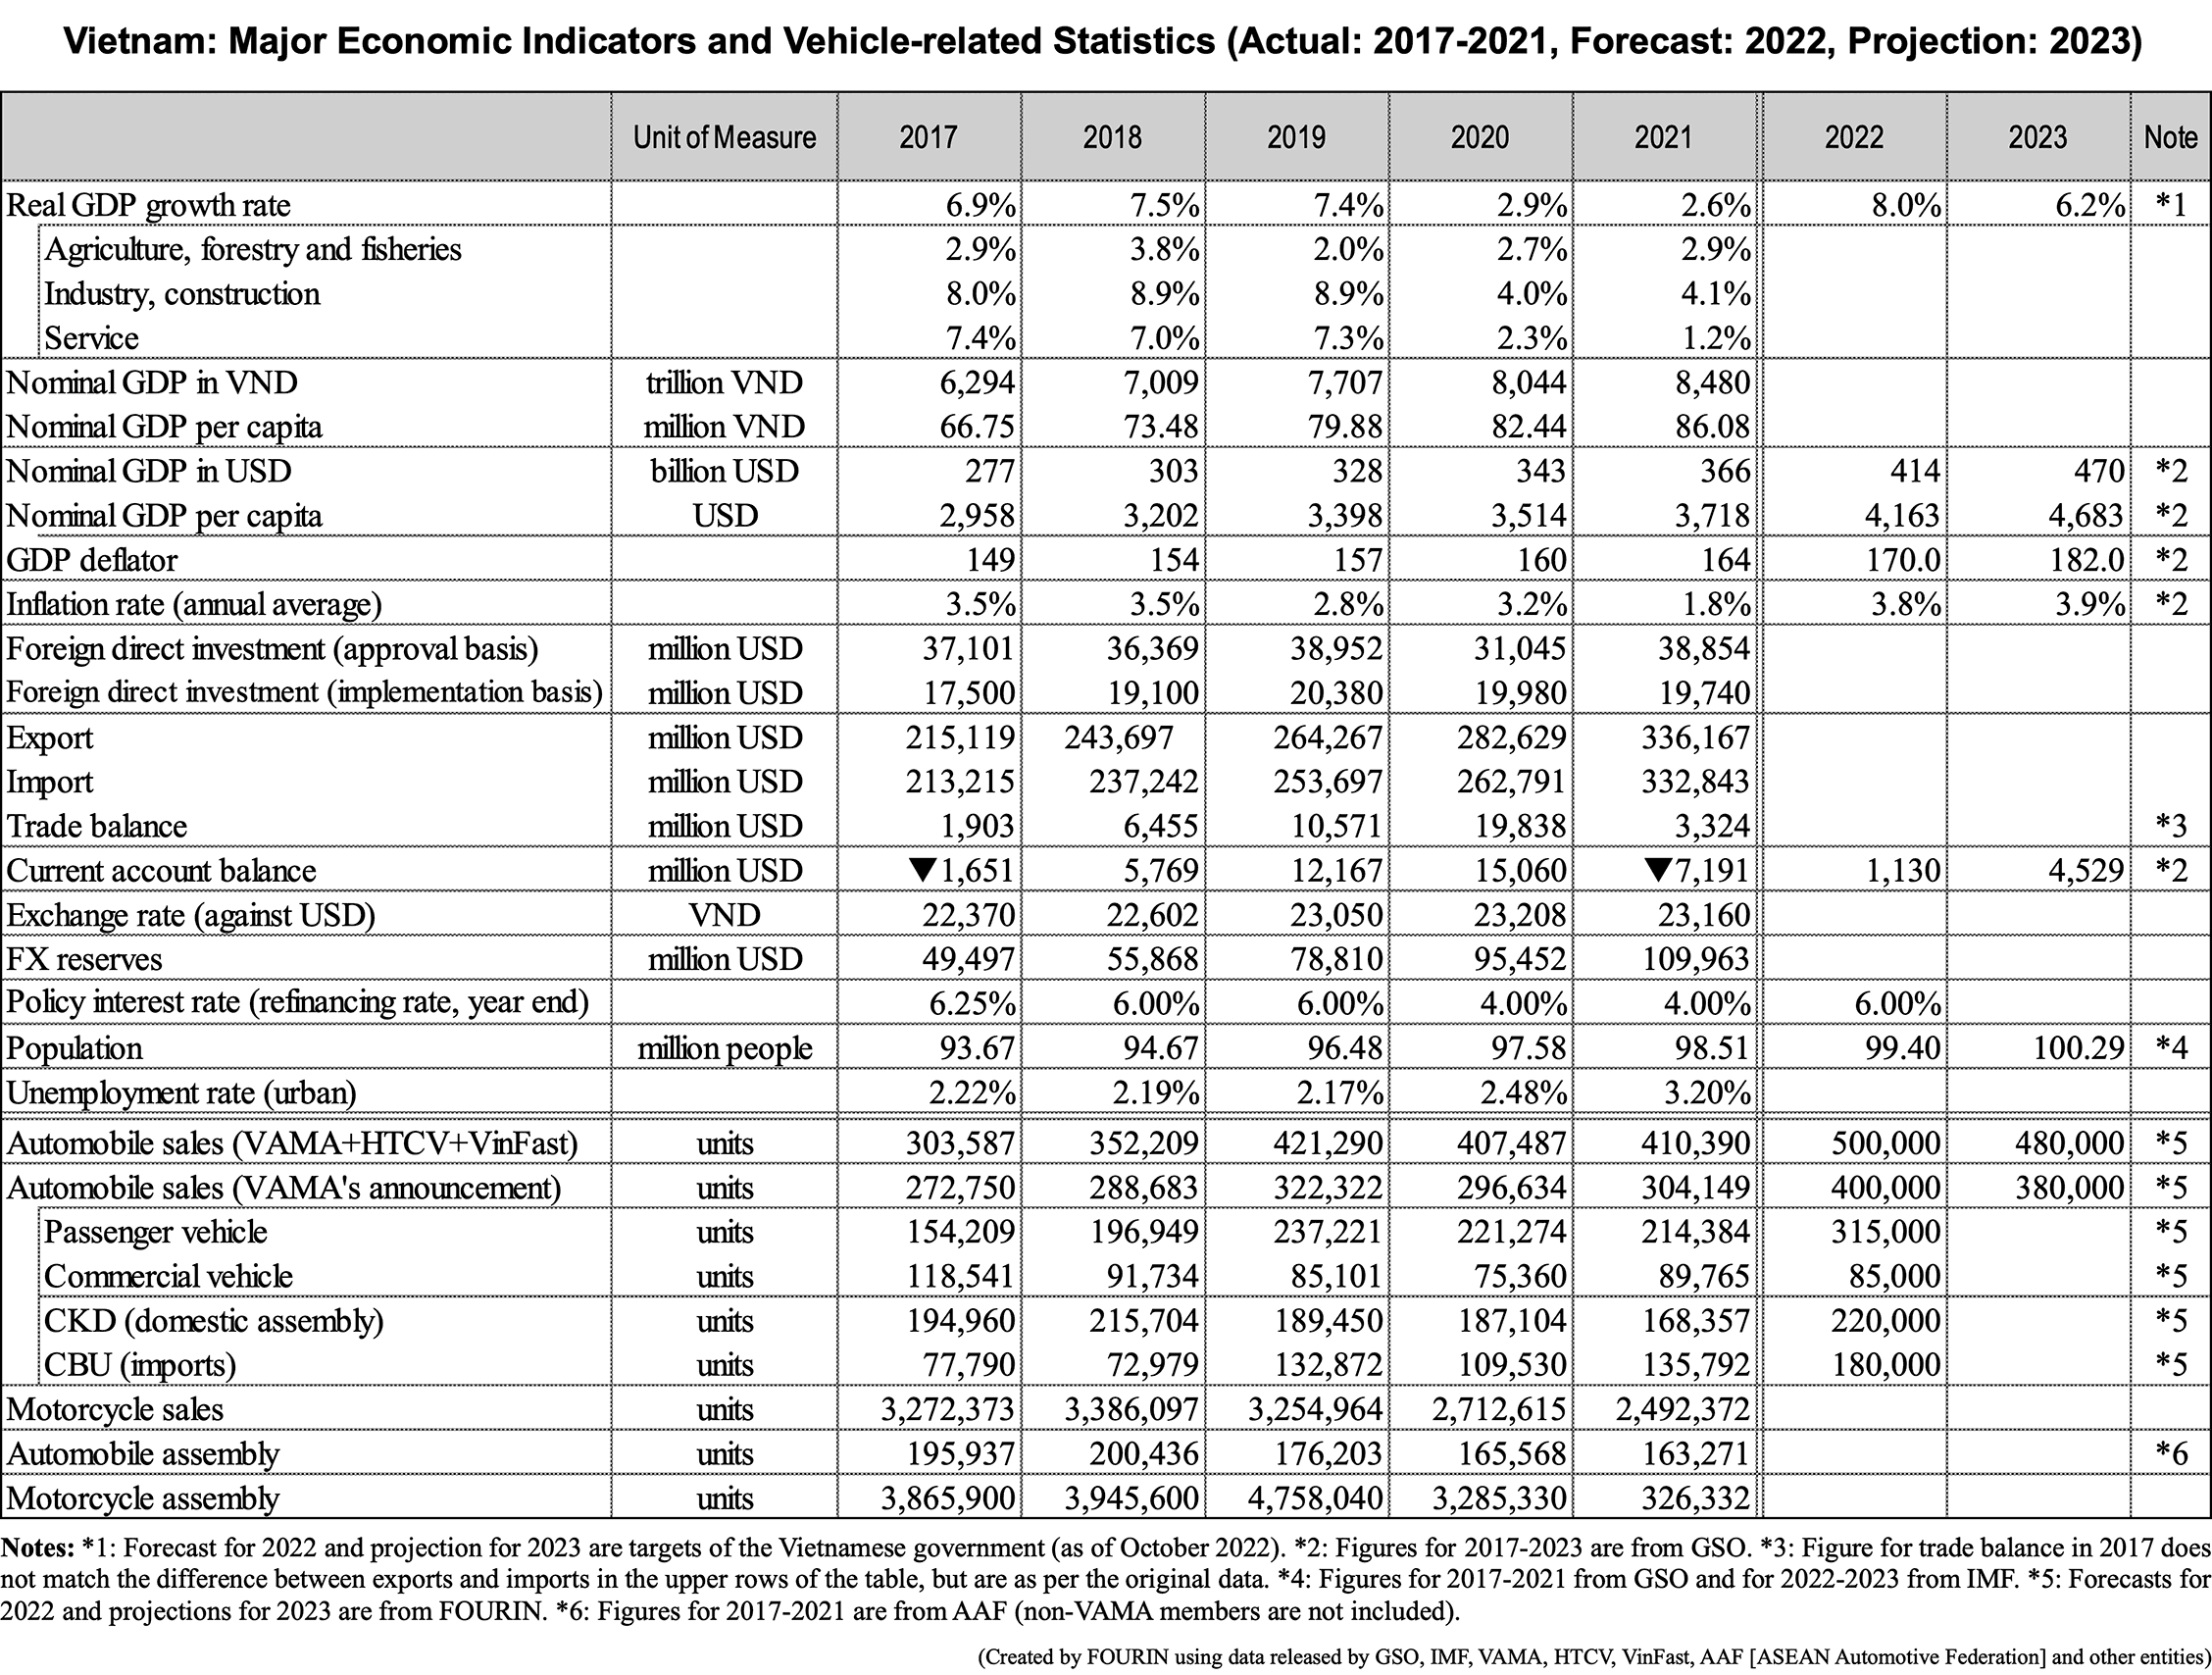 Table data: Vietnam: Major Economic Indicators and Vehicle-related Statistics (Actual: 2017-2021, Forecast: 2022, Projection: 2023)